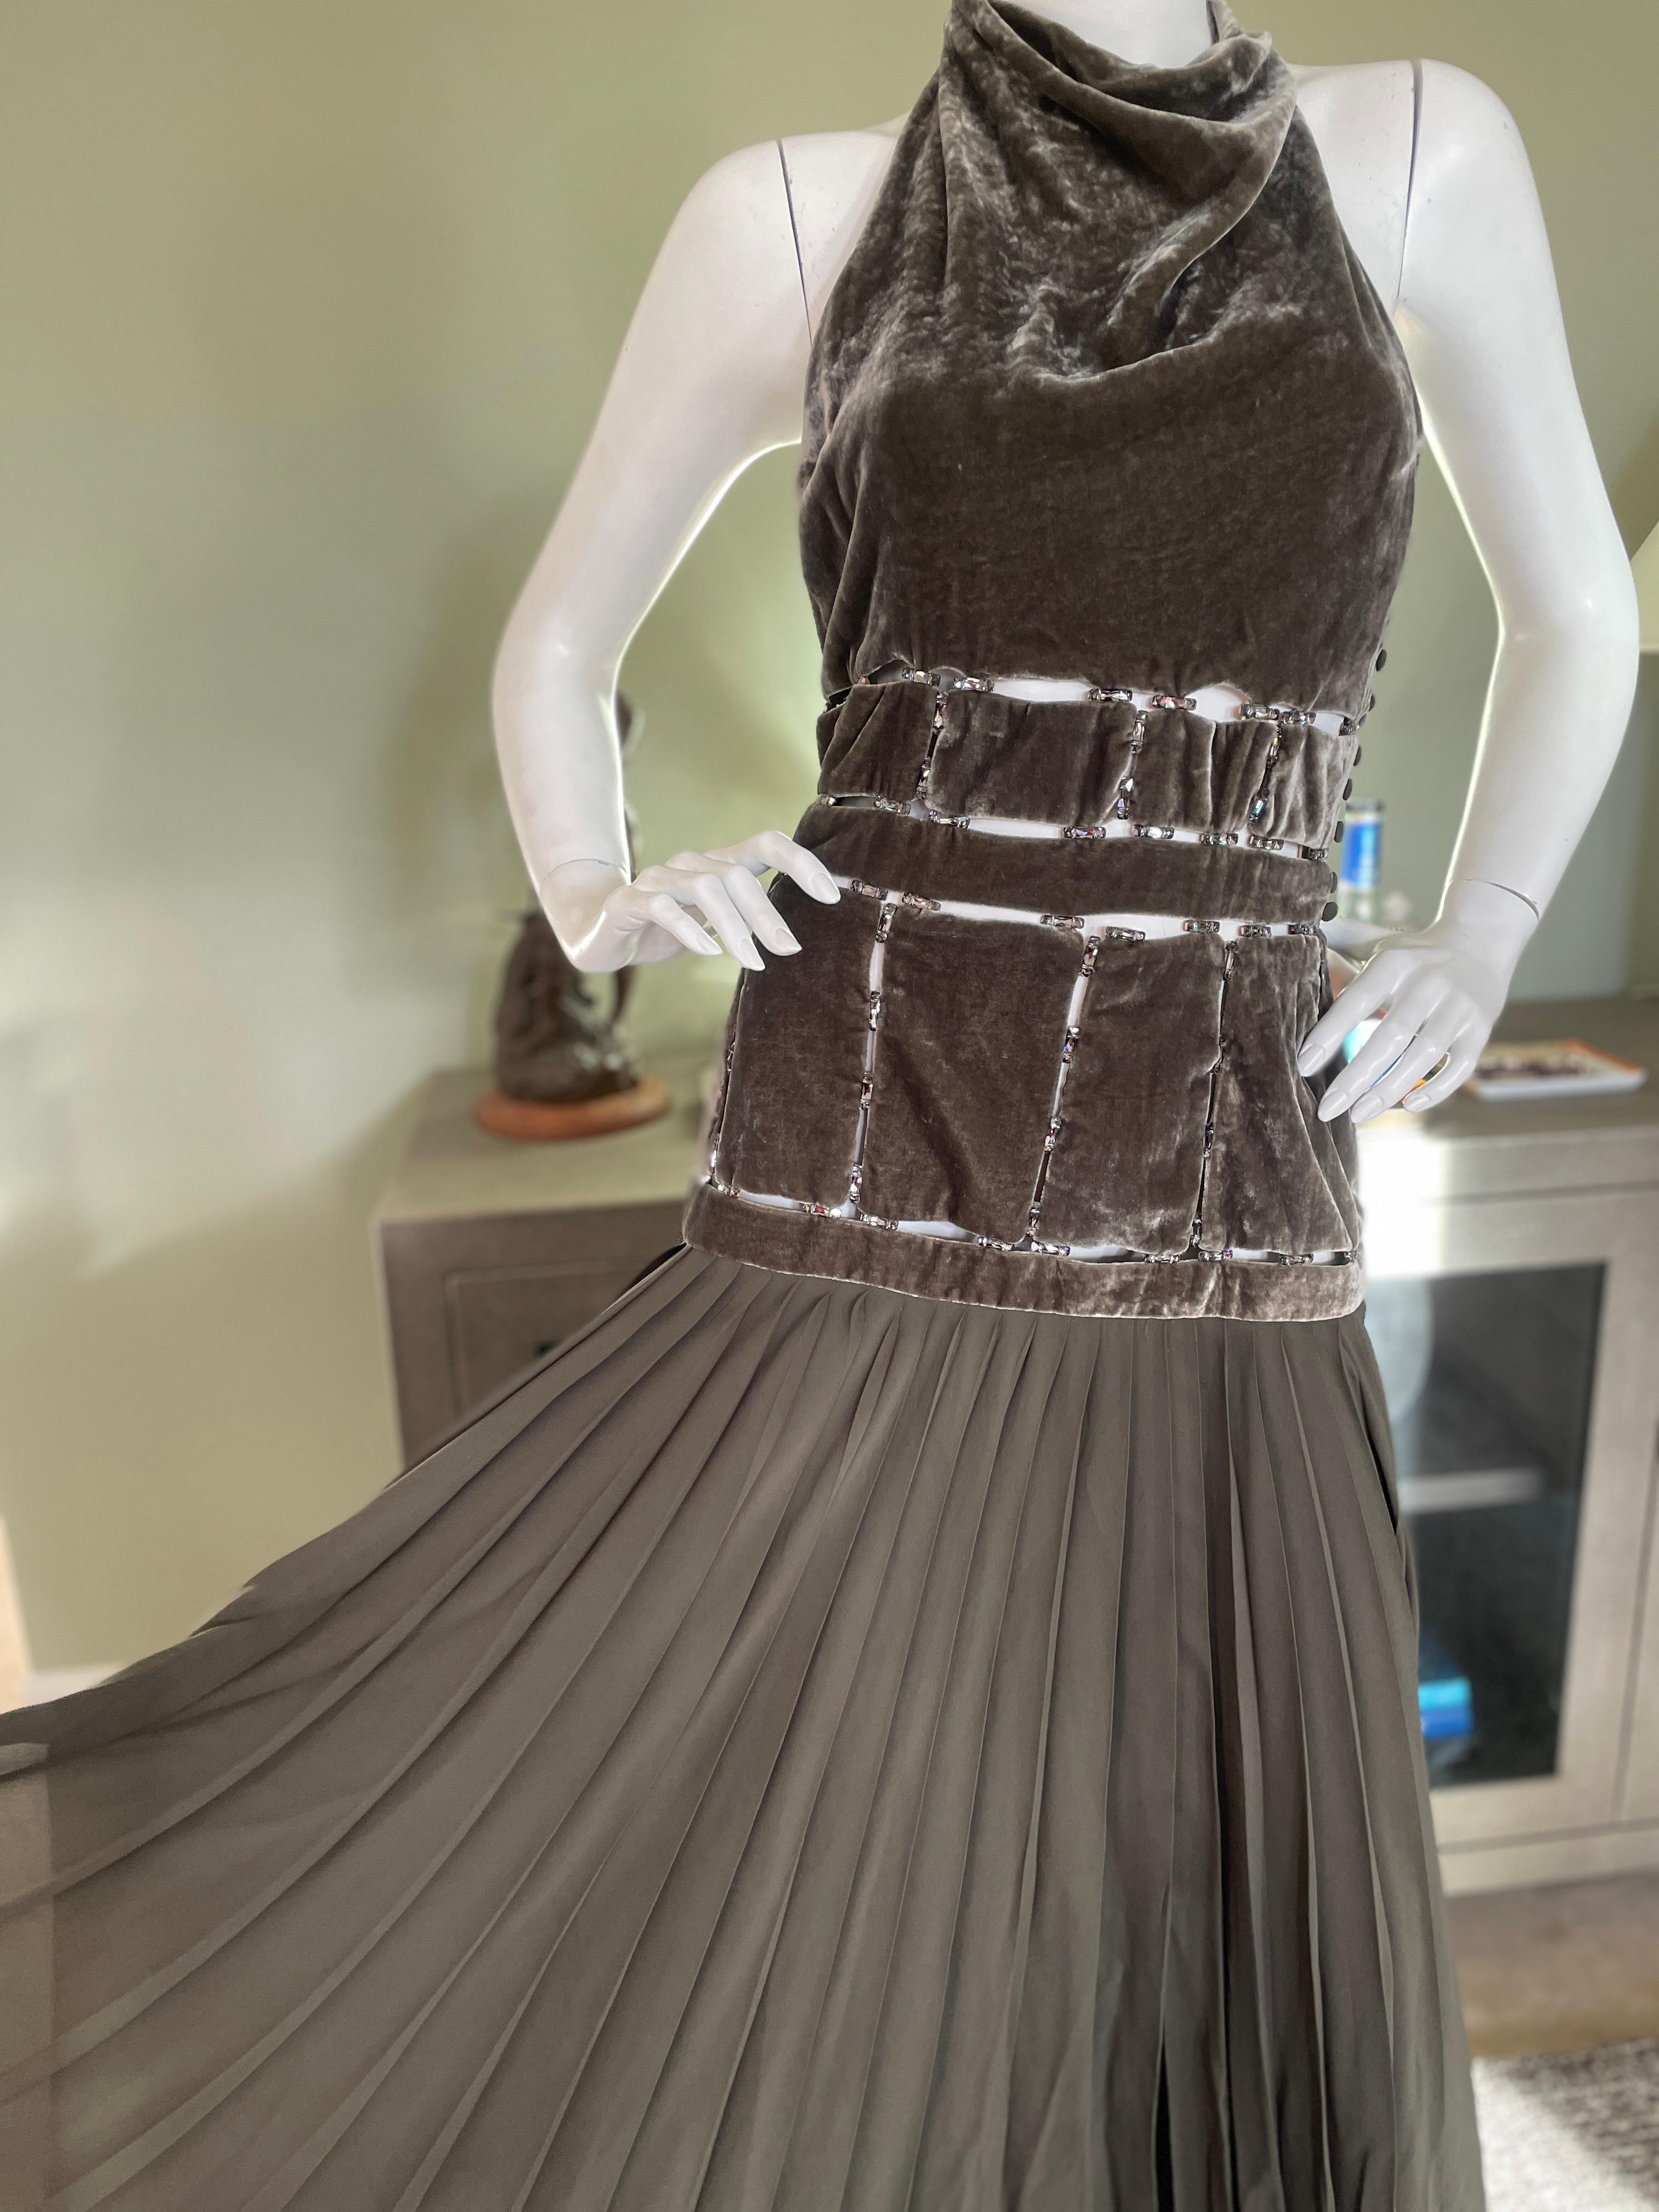 John Galliano 2006 Pleated Velvet Halter Dress with Crystal Trellis Details NWT In Excellent Condition For Sale In Cloverdale, CA